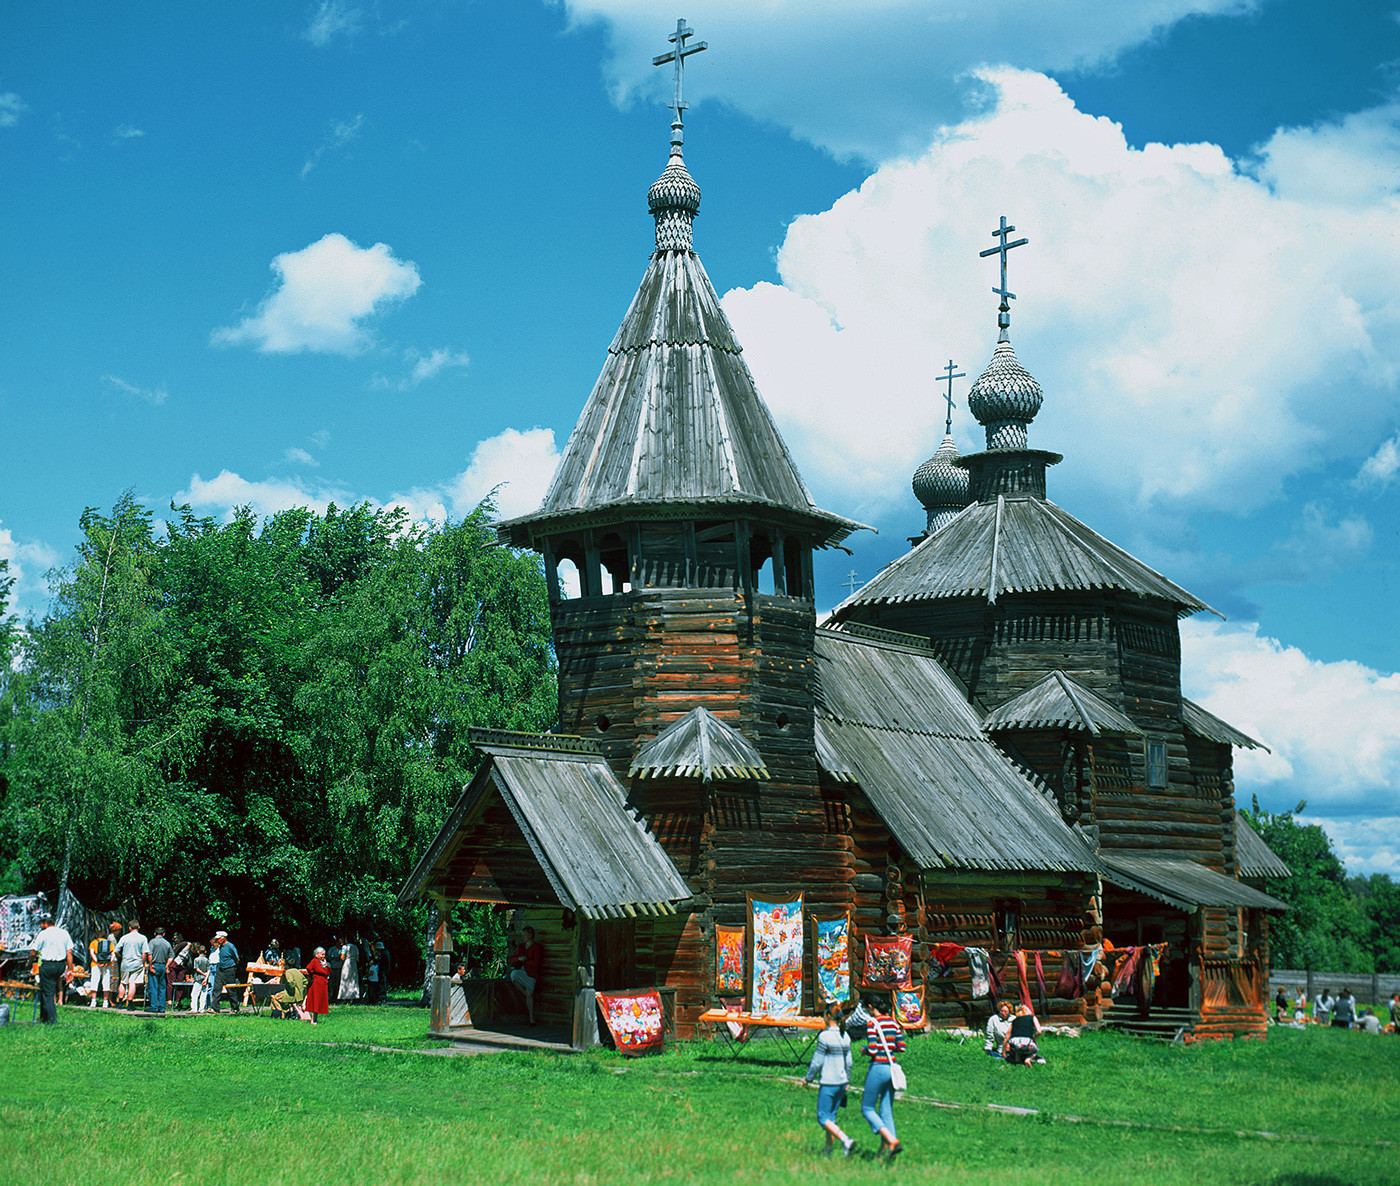 The Resurrection church,1776, at the Museum of Wooden Architecture